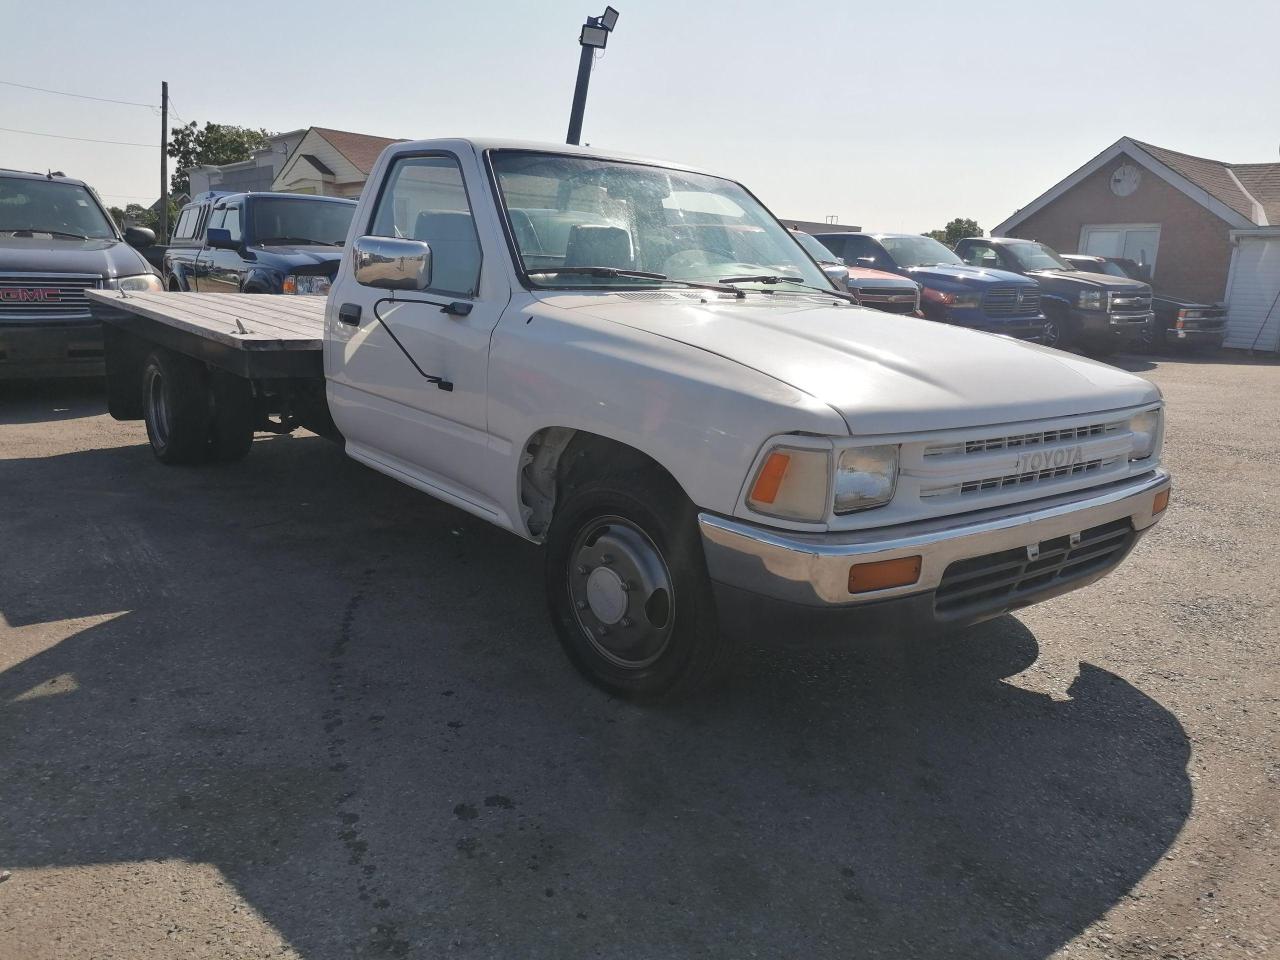 1989 Toyota Tacoma DUALLY*FLAT DECK*ONLY 58,000 MILES*NEW TIRES*AS IS - Photo #7